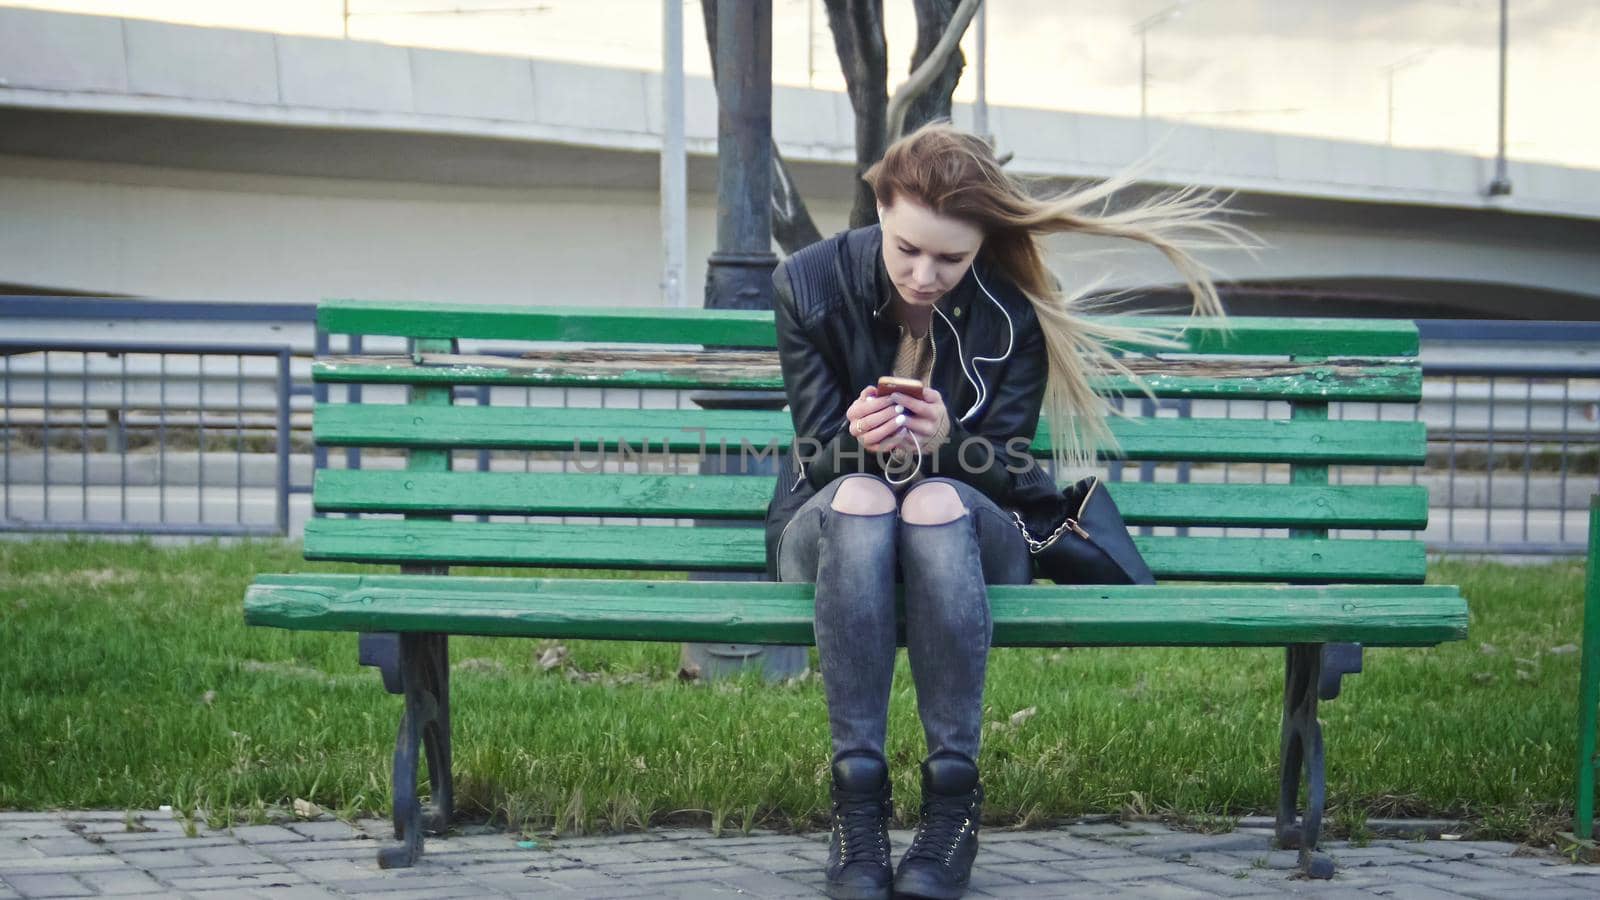 Dissapointed girl with long blonde hair in leather jacket straightens hair use gadget sitting on the bench in the wind listen headphones, wide angle, front view, telephoto